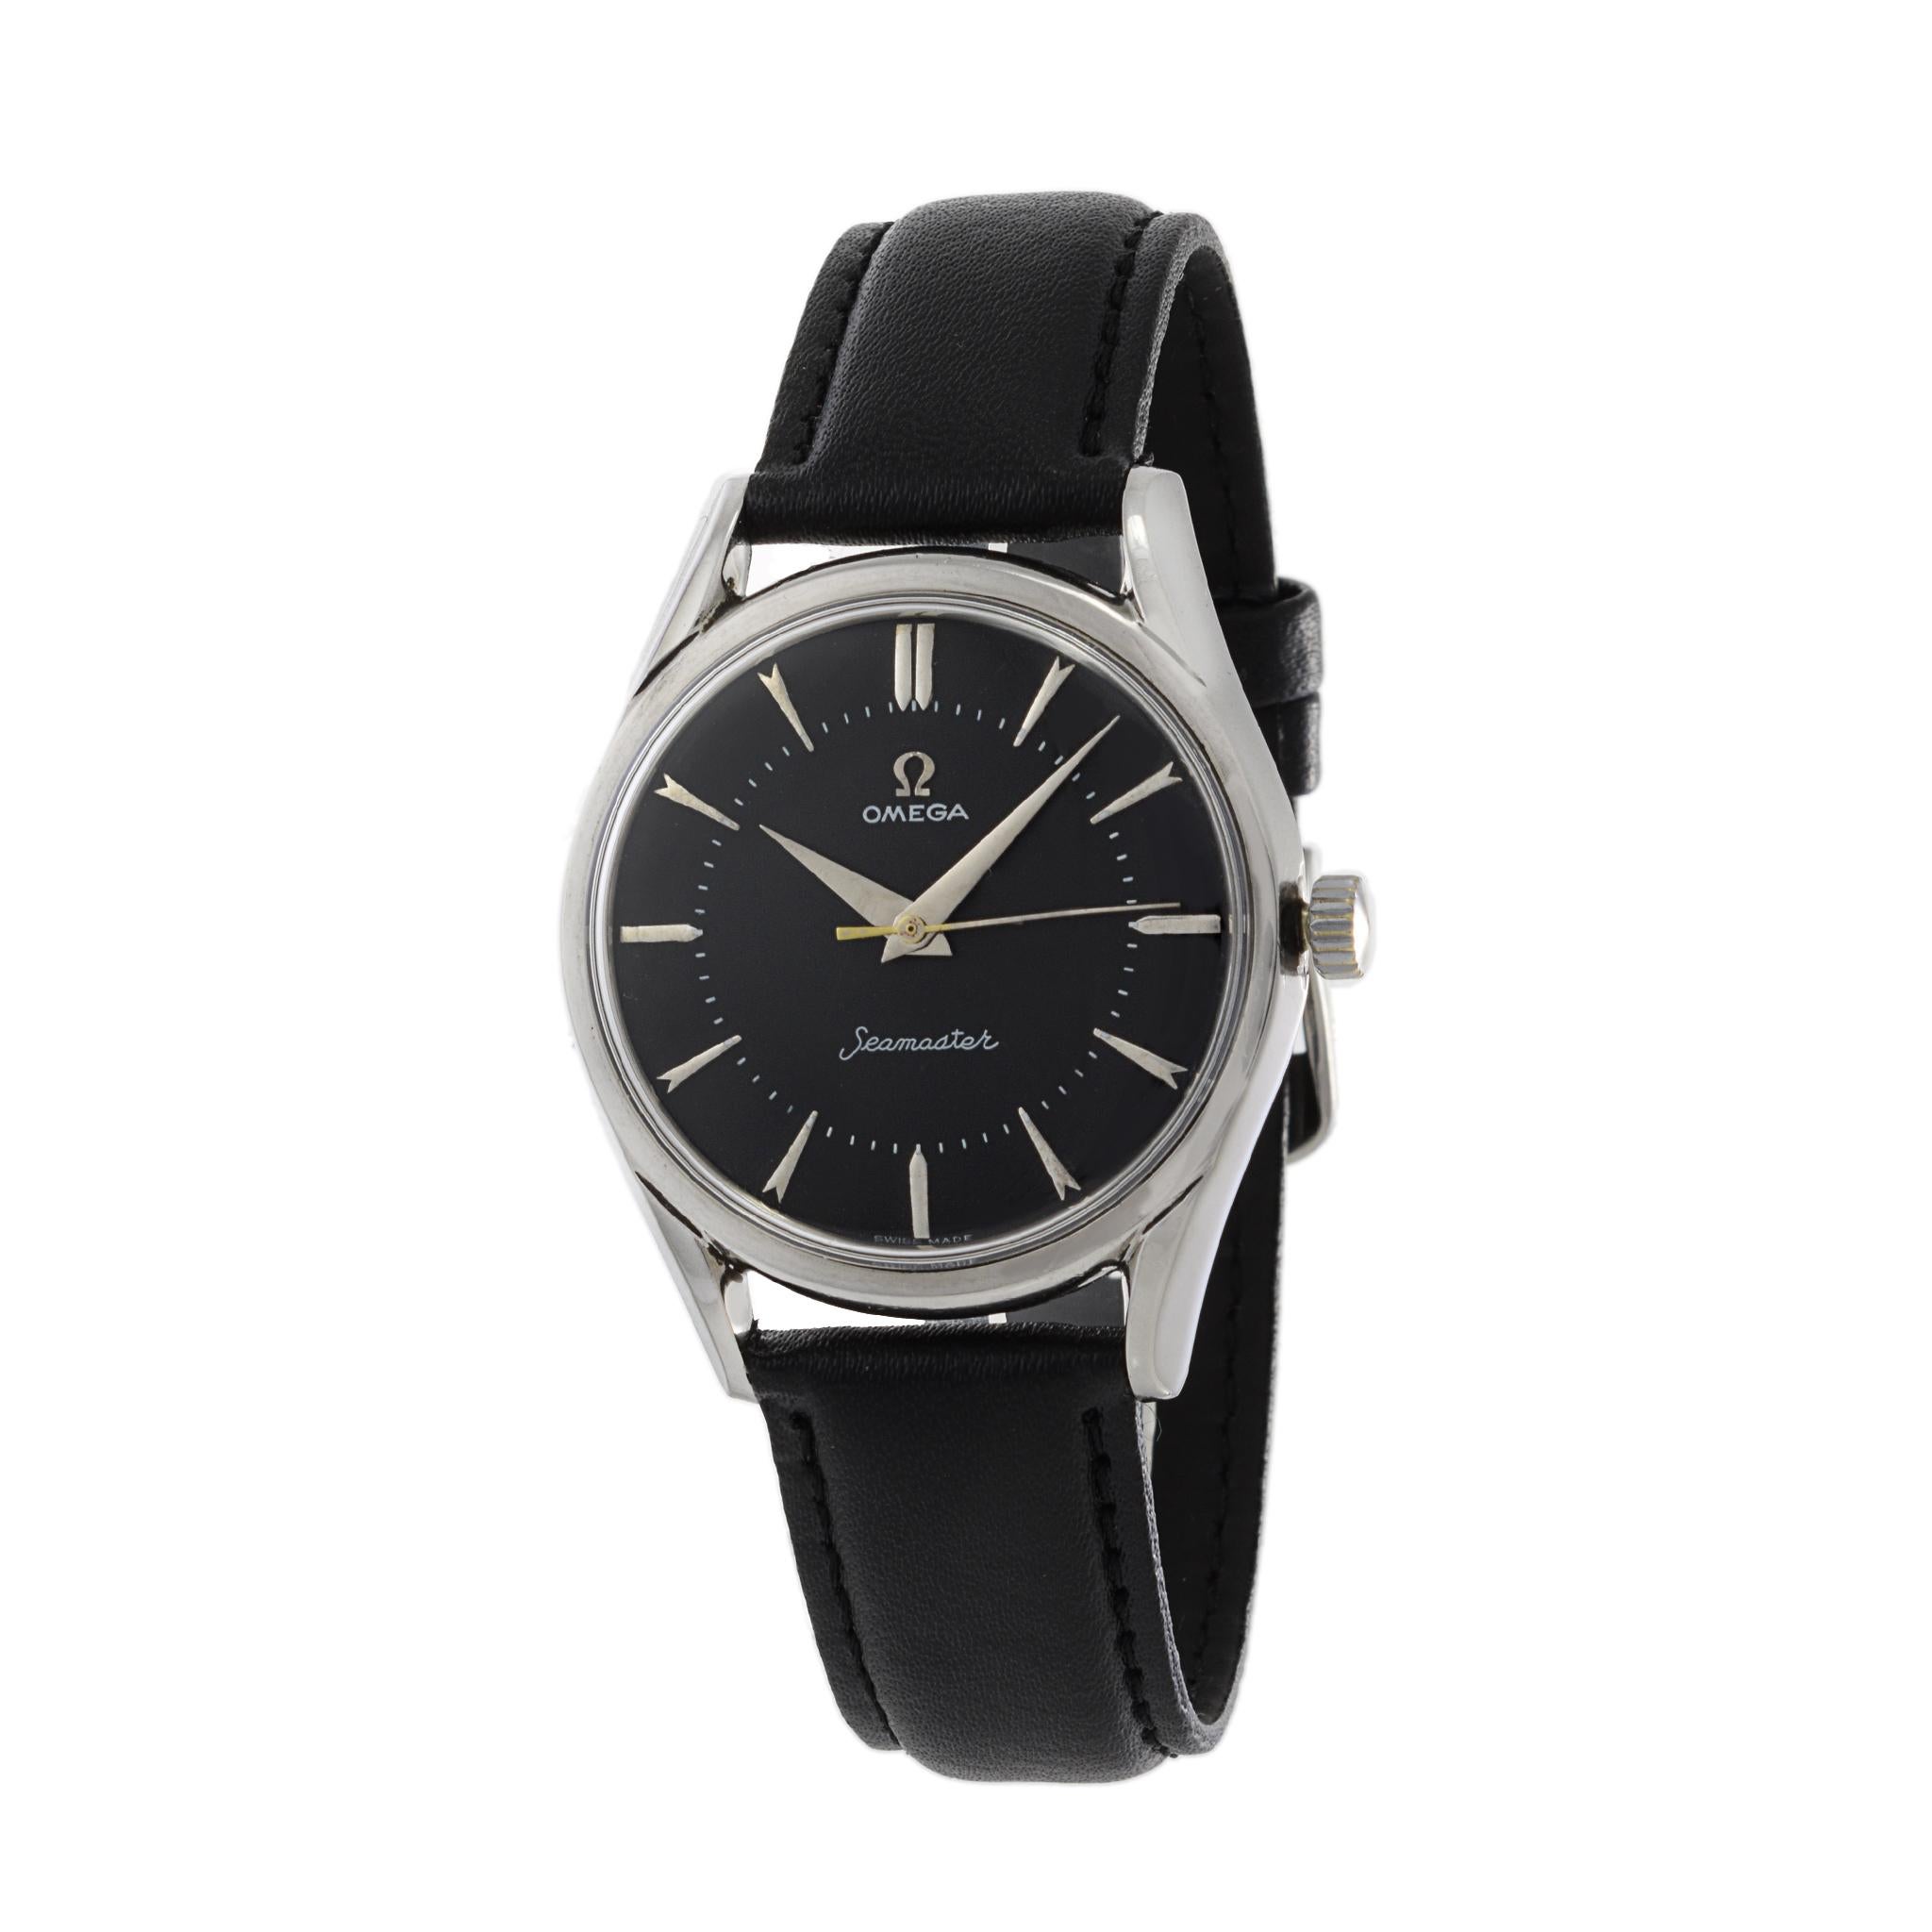 This is a jumbo Omega Seamaster Calatrava from 1956. At 36mm this watch was dramatically larger than most watches of the period. This watch is powered by a caliber 284 17 jewel manual wind movement. 

The dial of this watch is black with steel